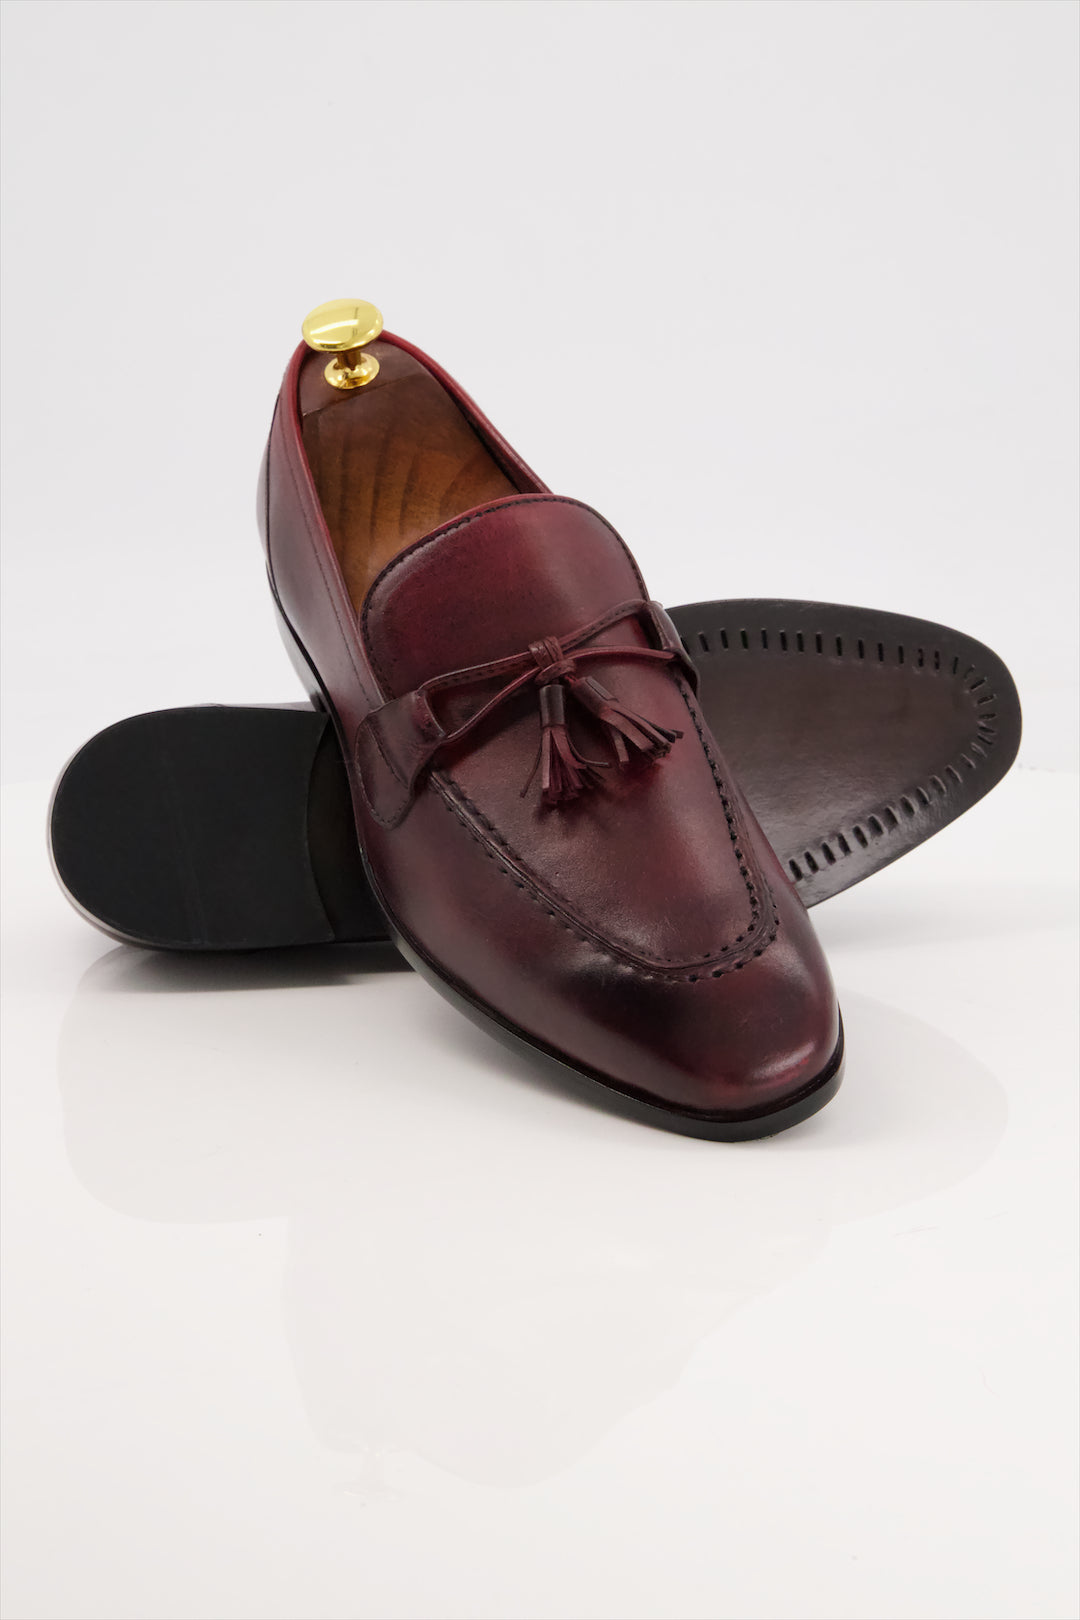 Heritage Tassel Loafers - Handcrafted Burgundy Leather Slip-On Shoes